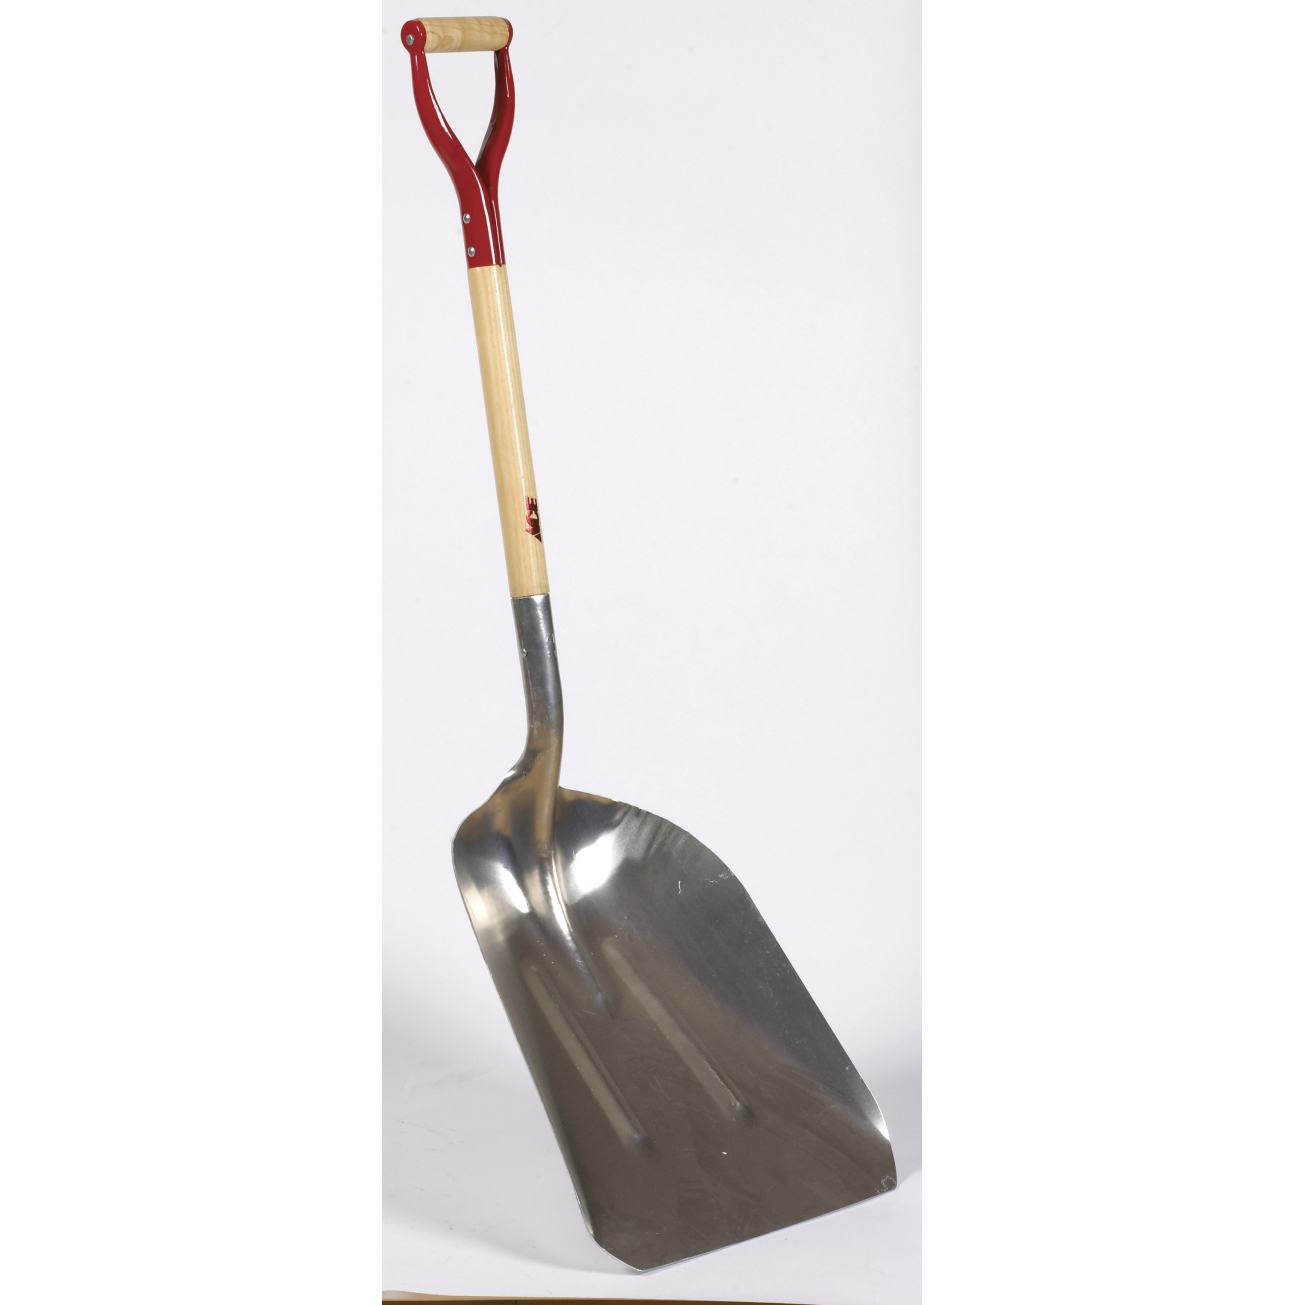 Grain and Scoop Shovels at Ace Hardware